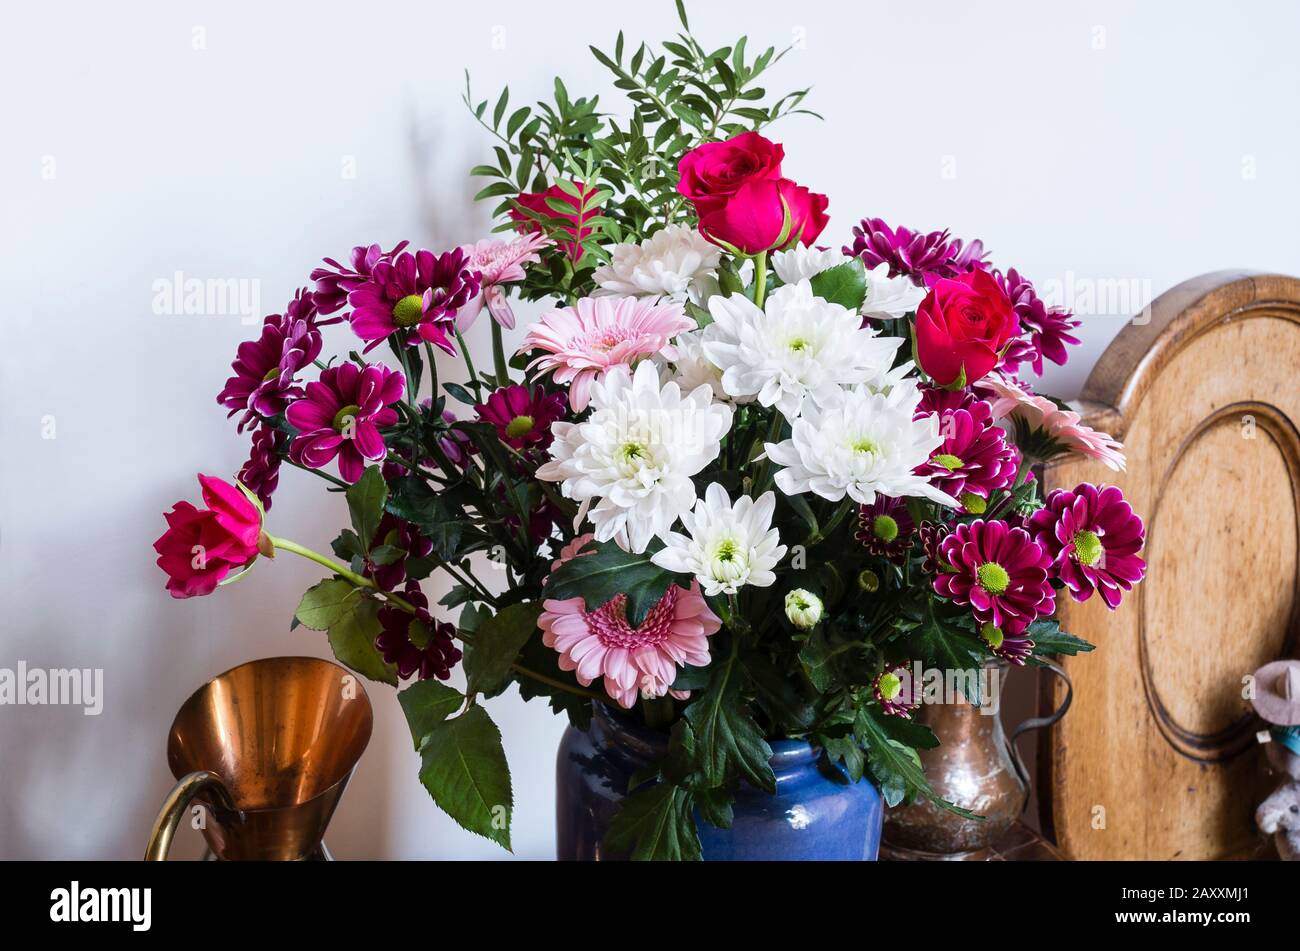 A floral arrangement indoors including red roses and  pink and white chrysanthemums in winter UK Stock Photo